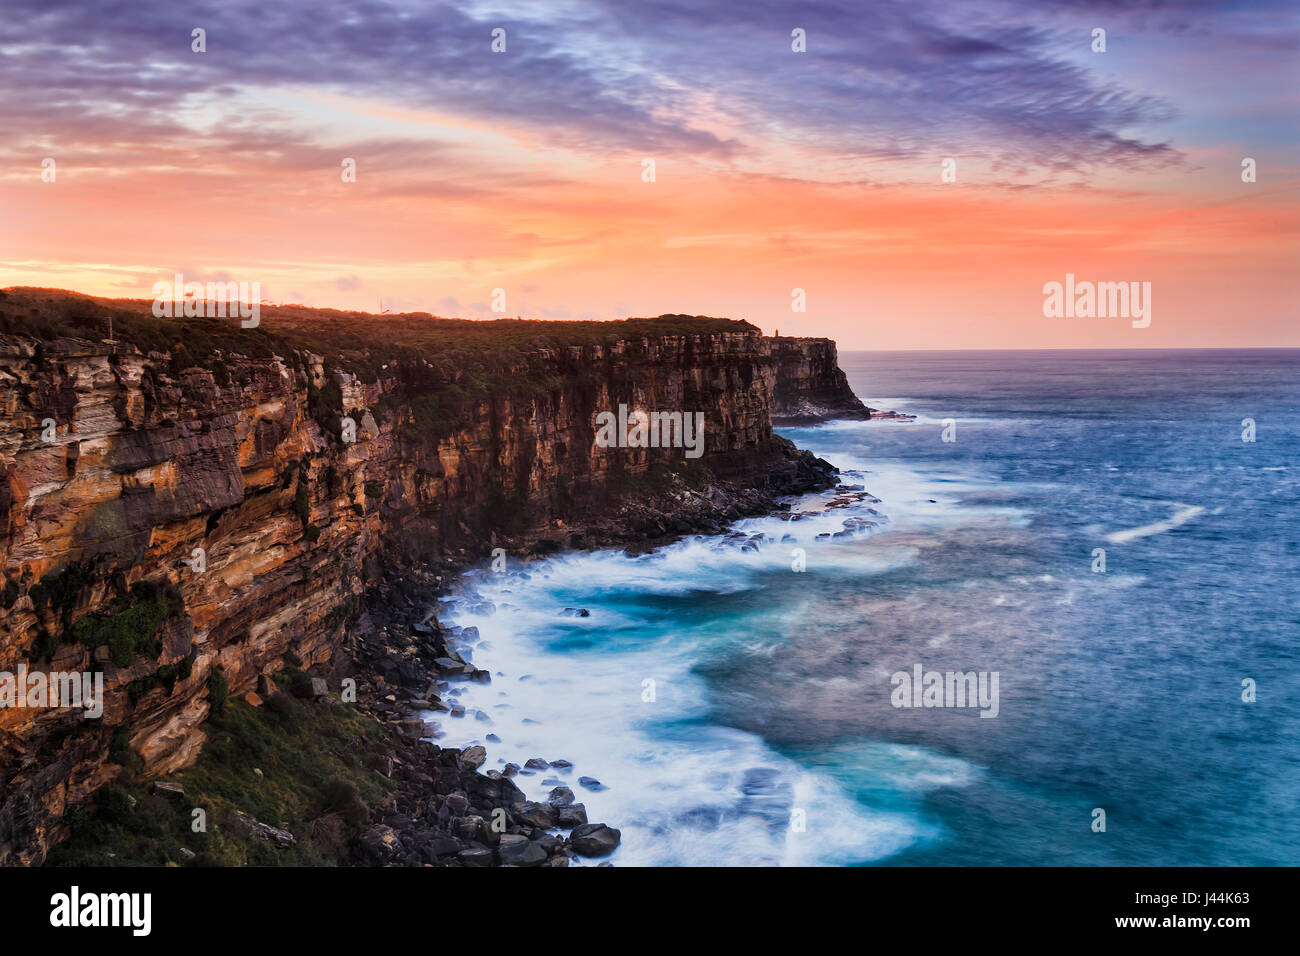 Steep cliffs of rugged sydney coast from North head entrance to Sydney harbour at sunset. Red illuminated sky reflects in blurred waters of surfing pa Stock Photo